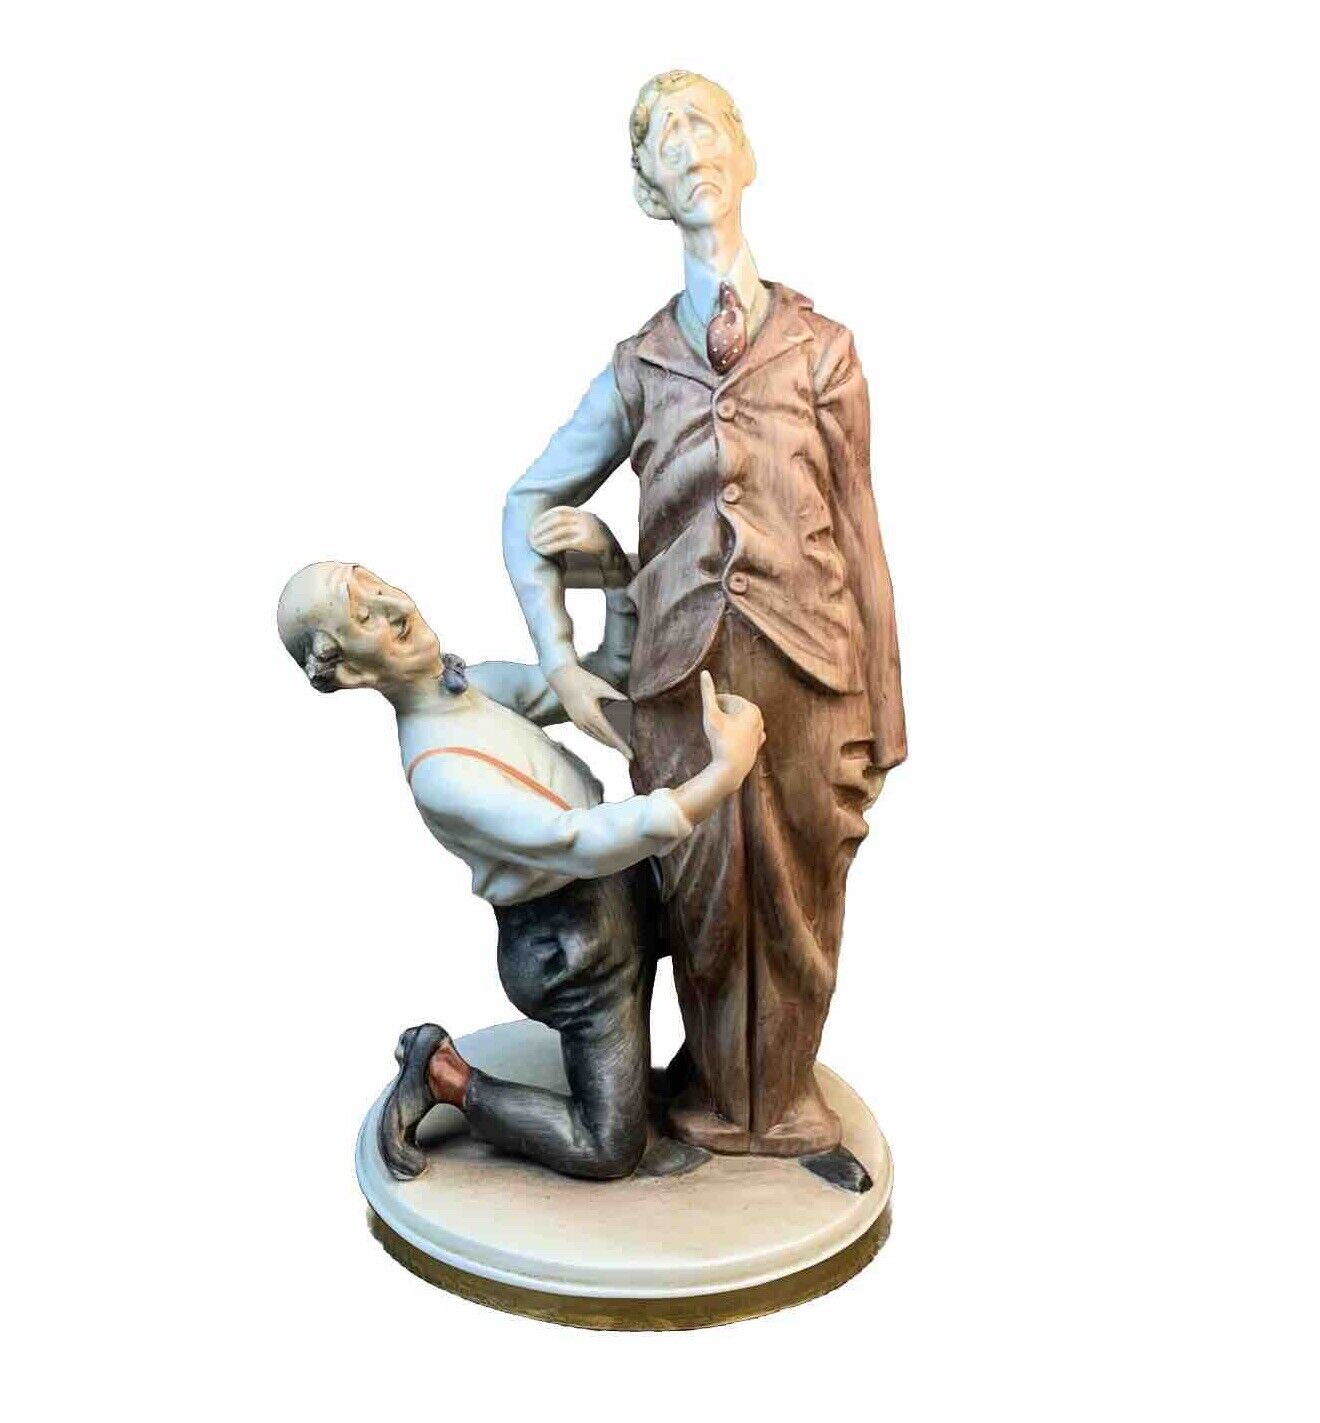 Vintage Pucci Capodimonte Arnart Tailor at Work Porcelain Figurine #1143 Italy